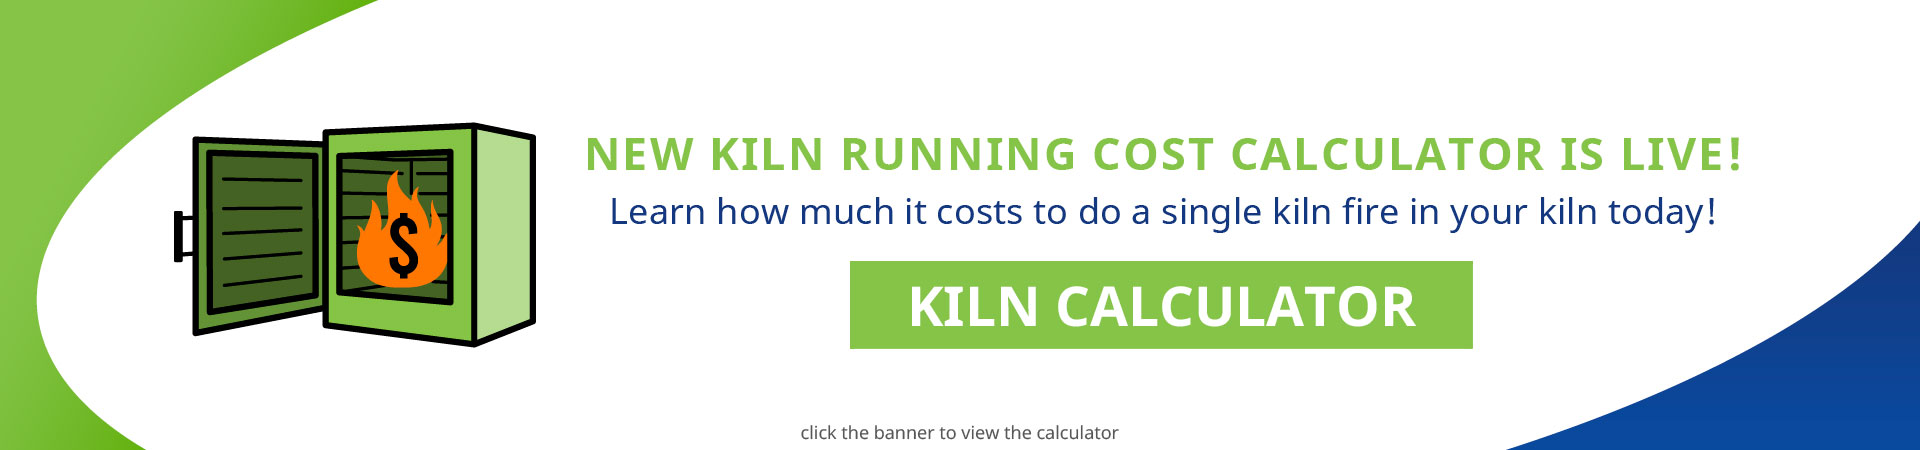 Learn how much it costs to do a single kiln fire with Ceramicraft's Kiln Running Cost Calculator